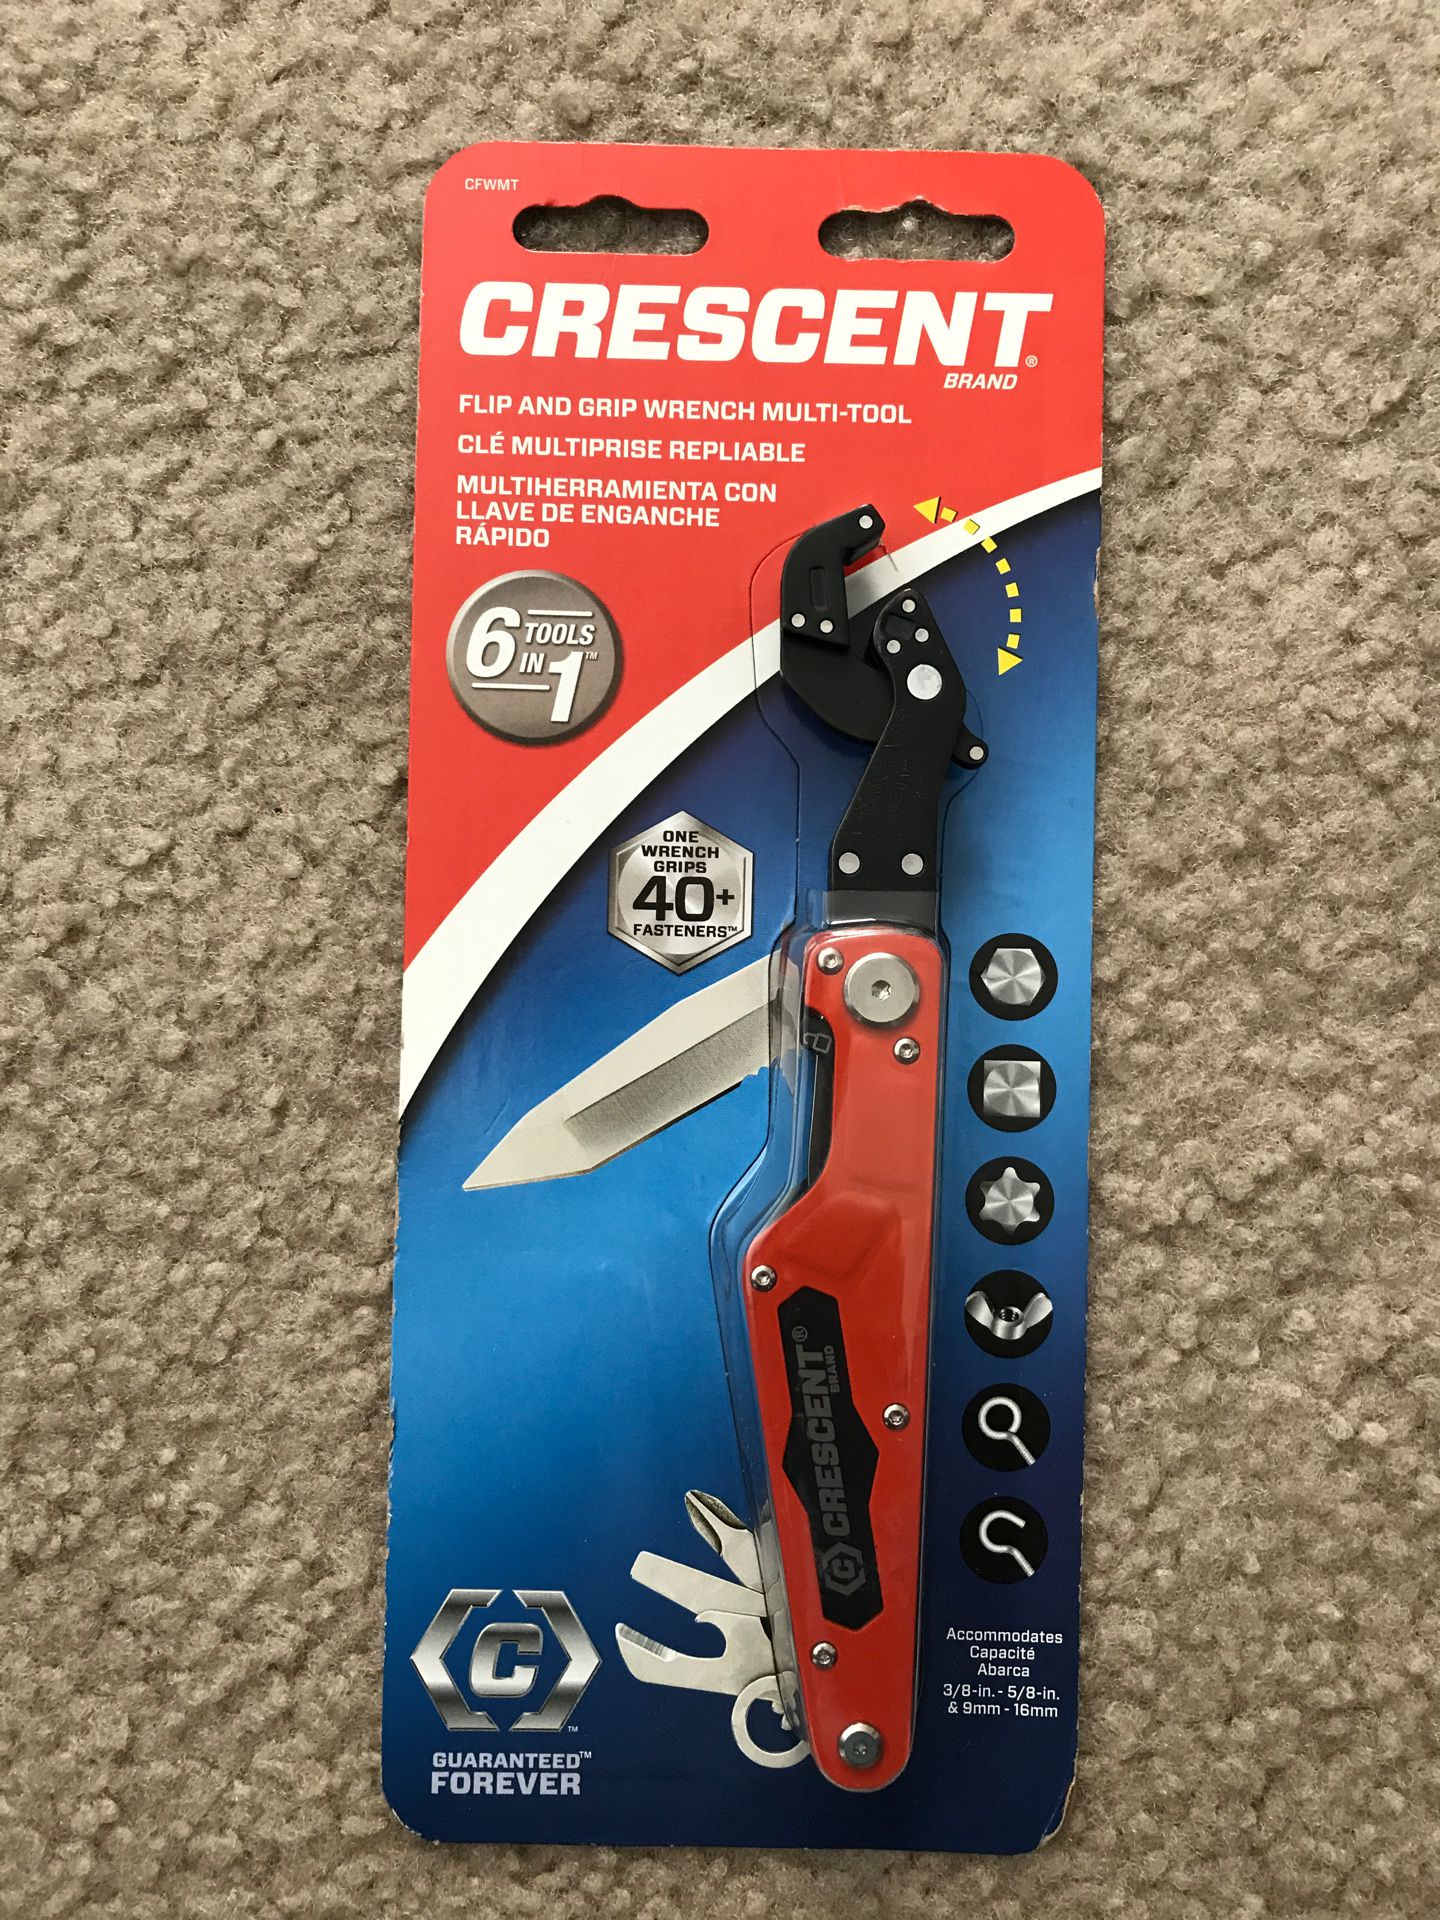 CRESCENT flip and Grip wrench multi- tool